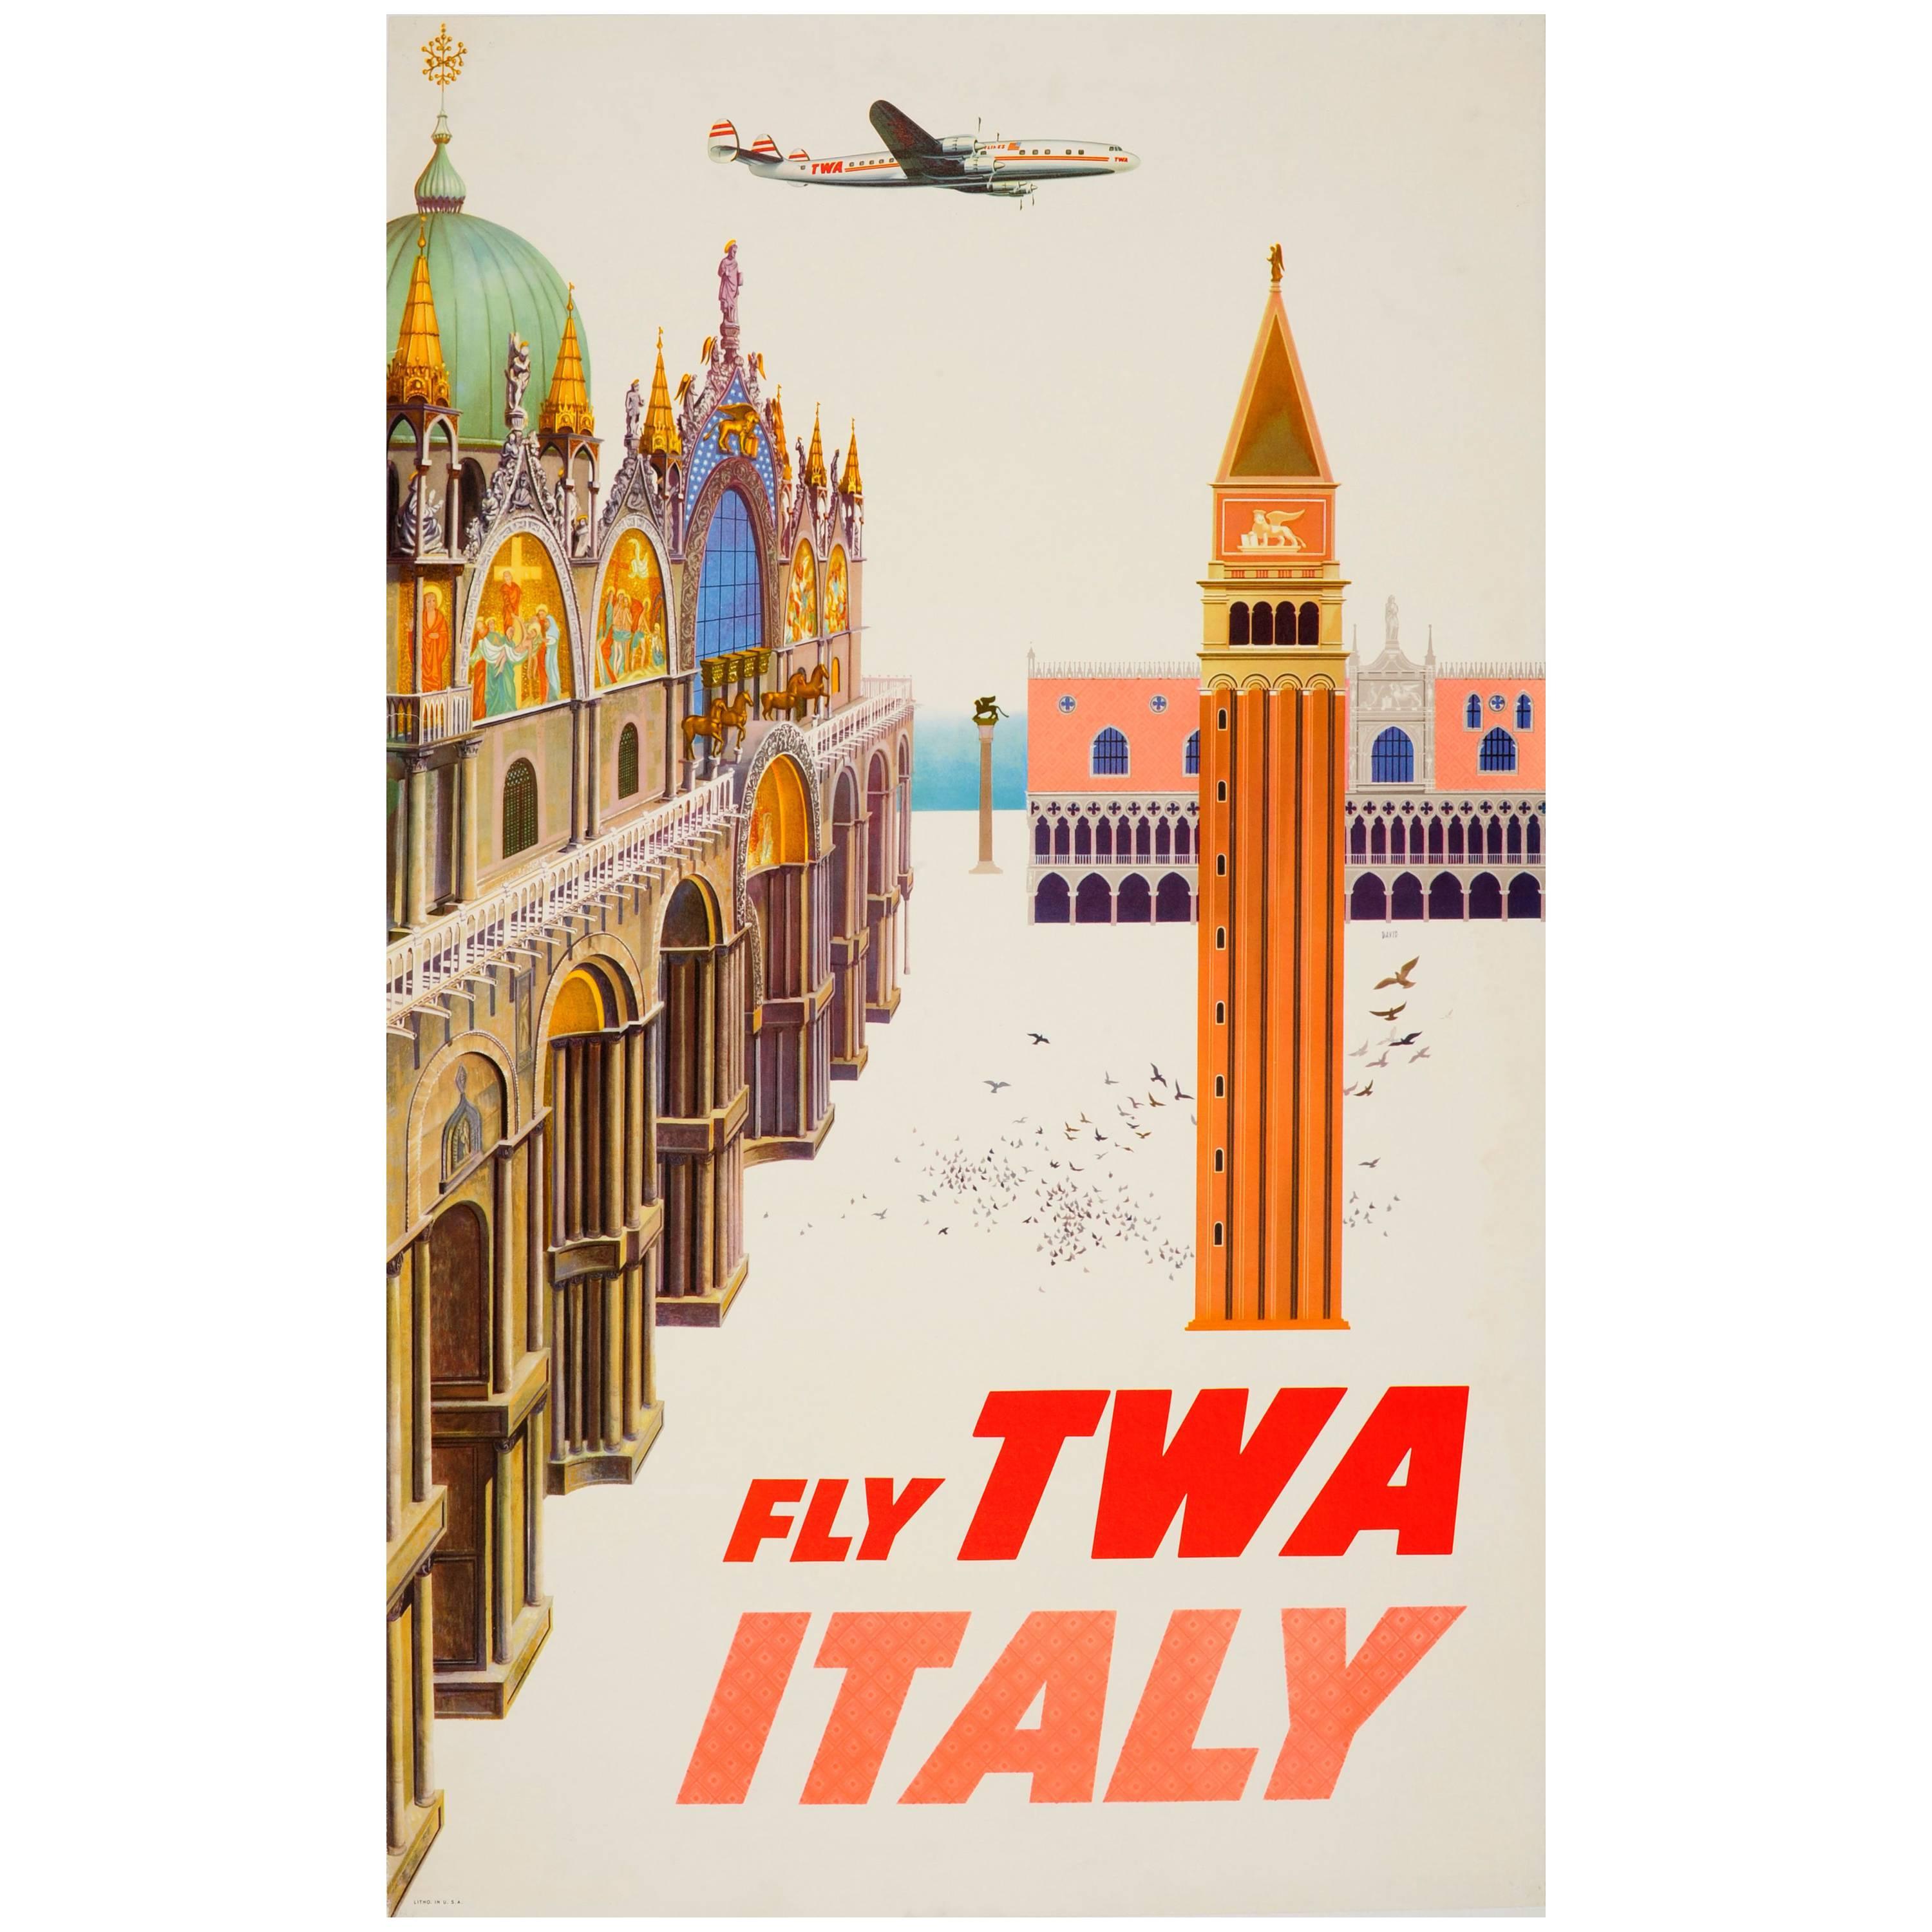 Original Vintage Travel Poster by David Klein - Fly TWA Italy - Featuring Venice